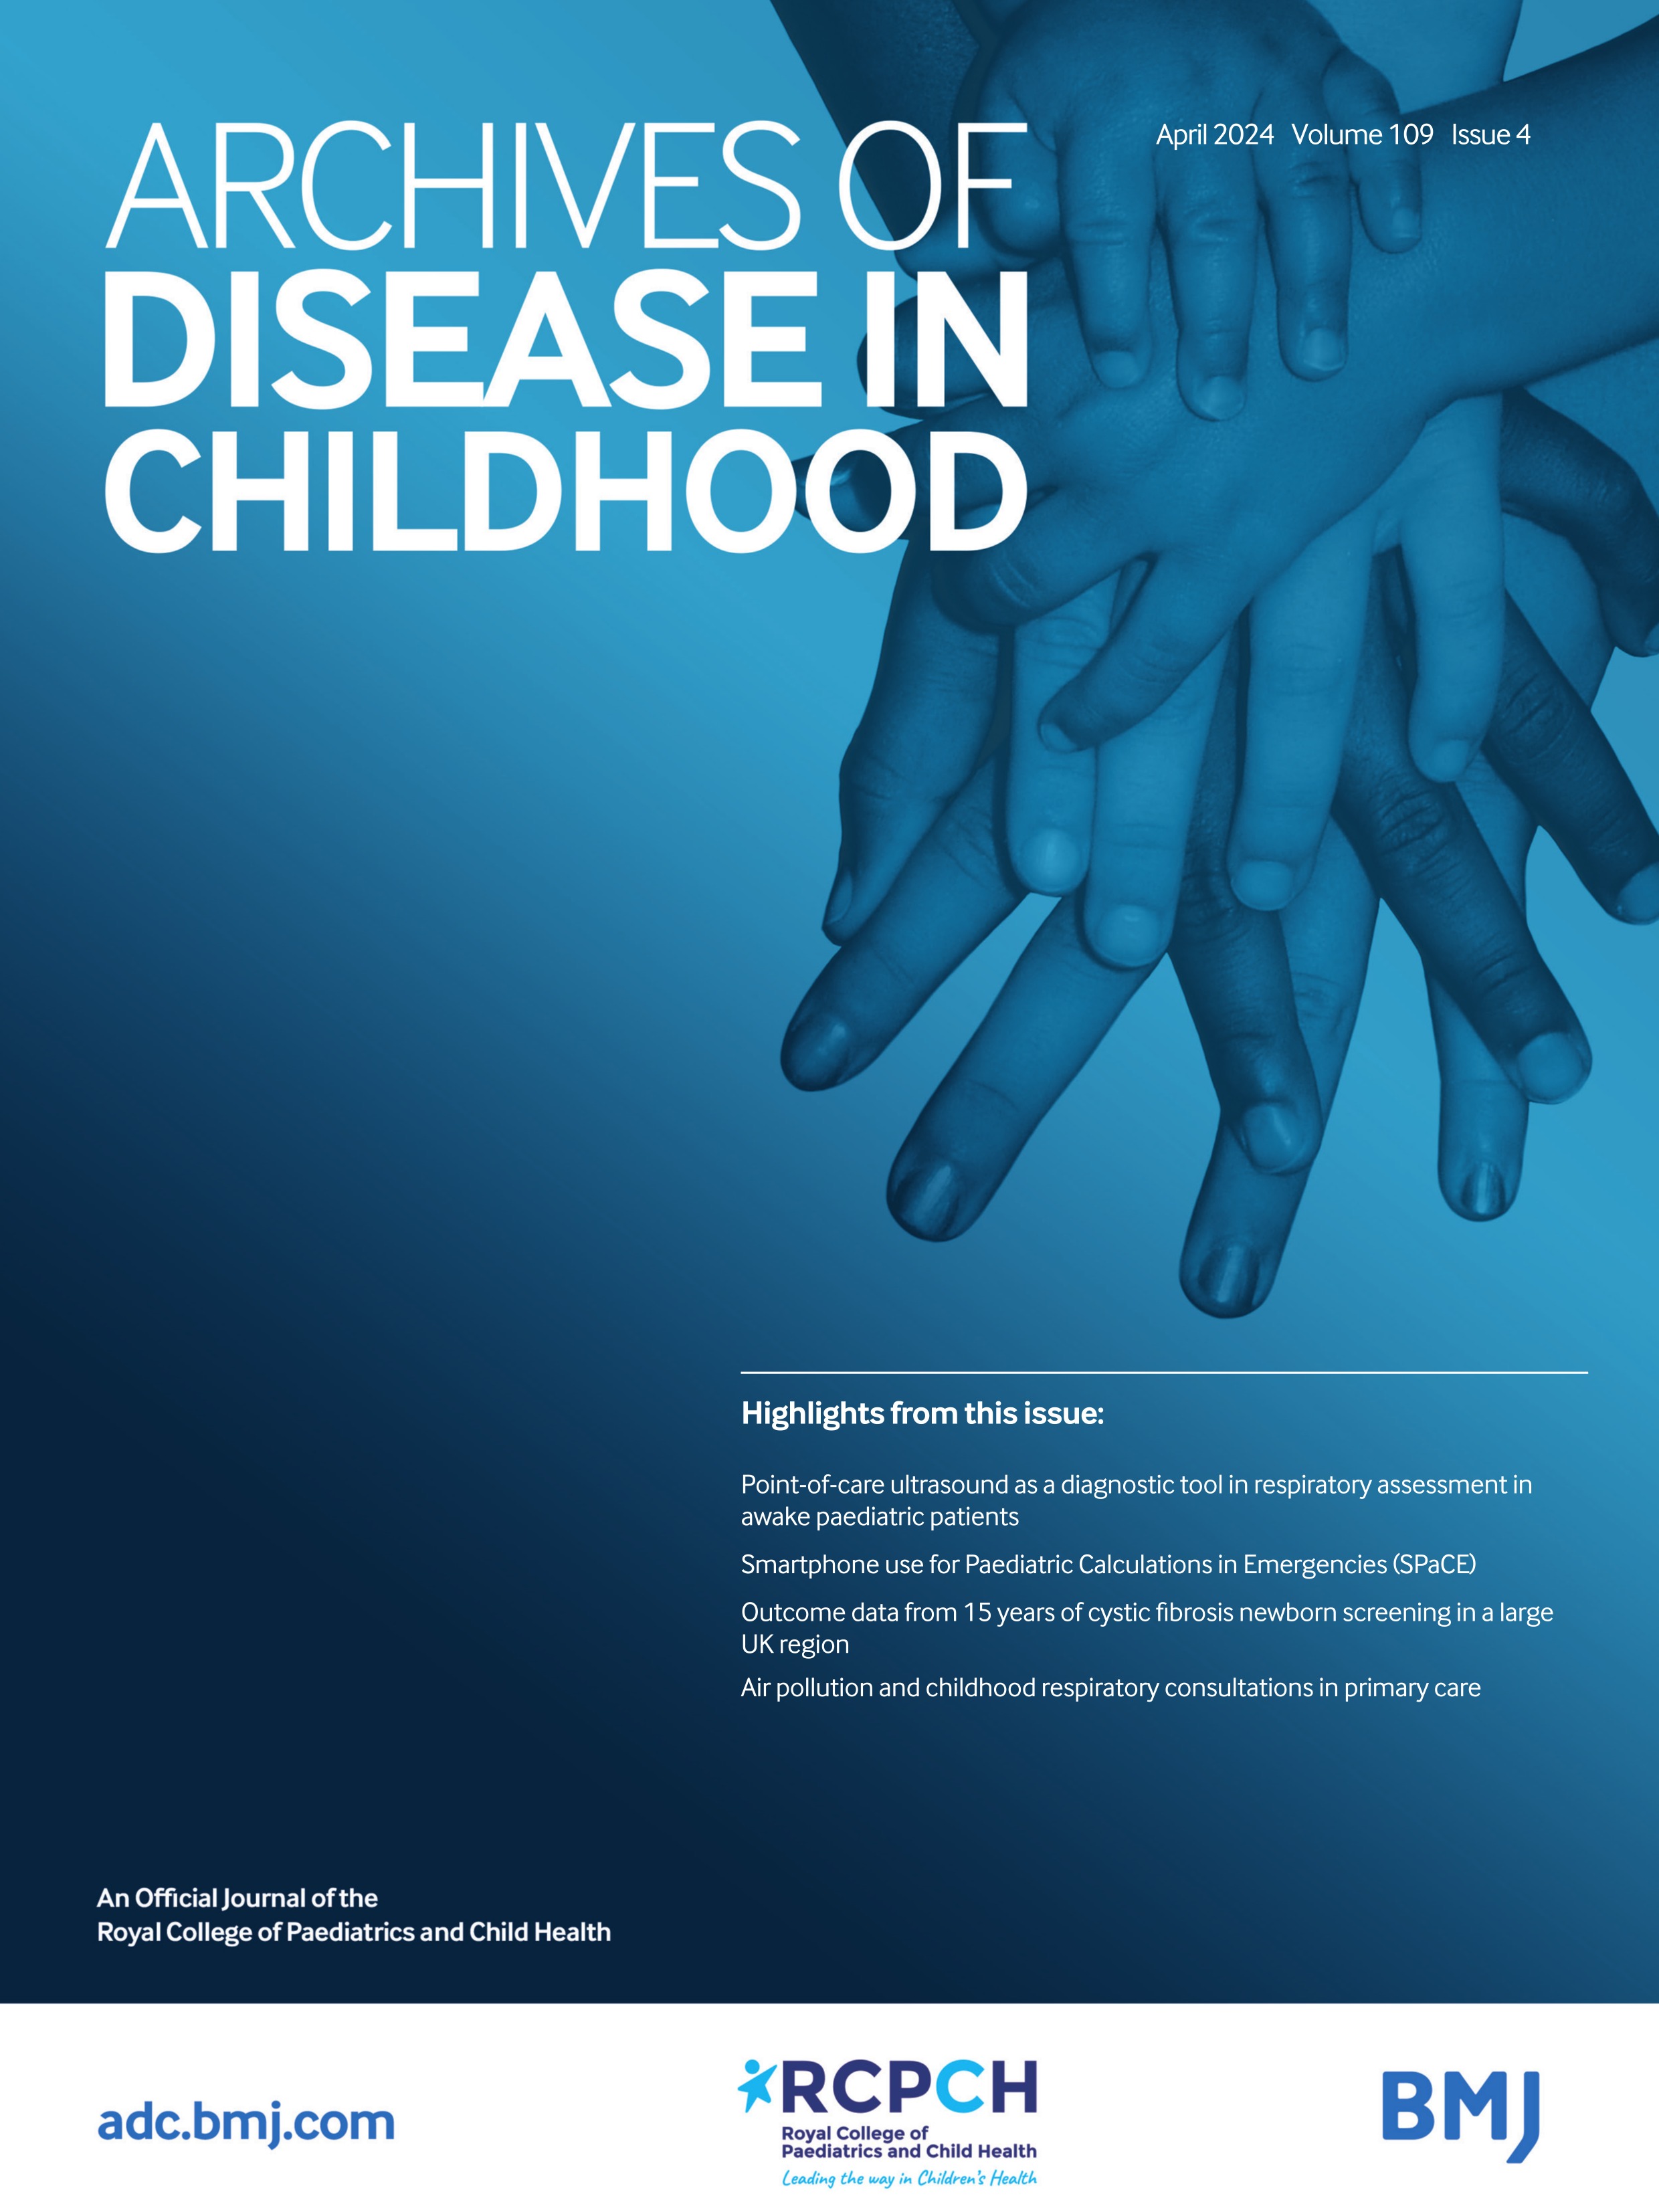 Global epidemiology of asymptomatic colonisation of methicillin-resistant Staphylococcus aureus in the upper respiratory tract of young children: a systematic review and meta-analysis